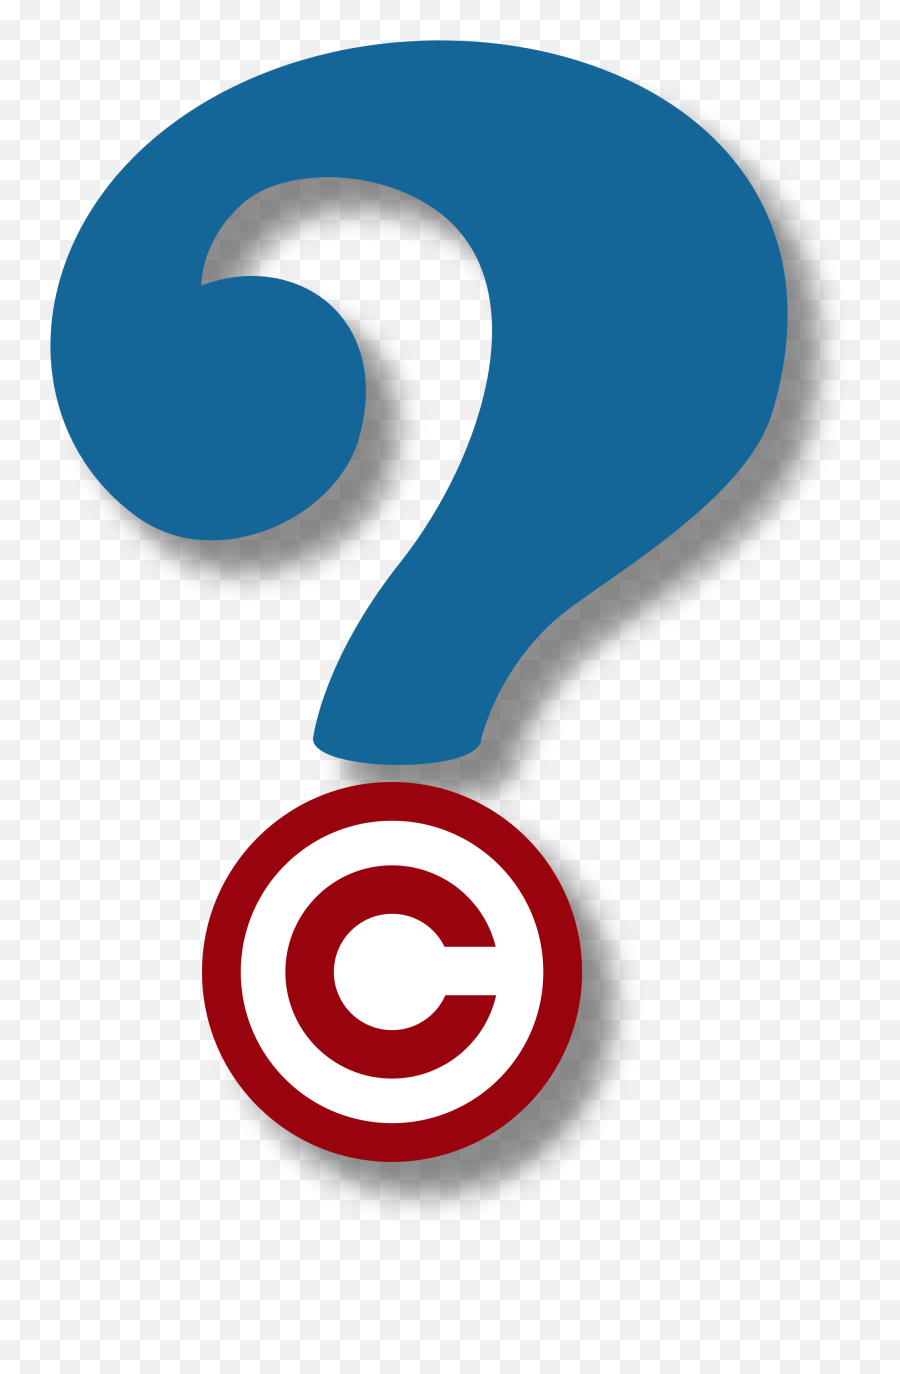 Questionmark Png - Question Mark No Copyright,Questionmark Png